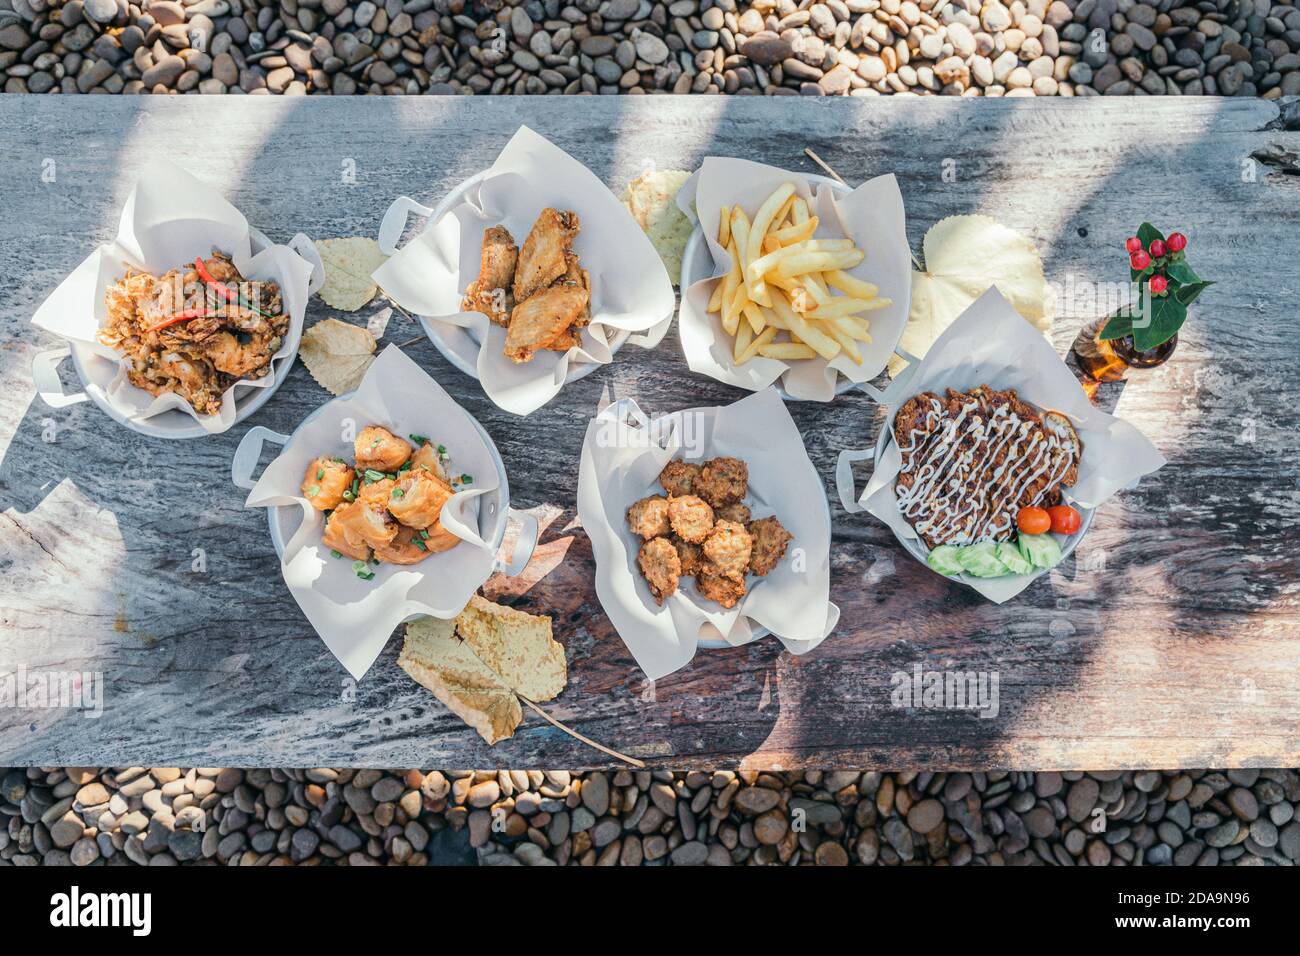 Top view deep-fried food party on outdoor wooden table wit stone ground background Stock Photo